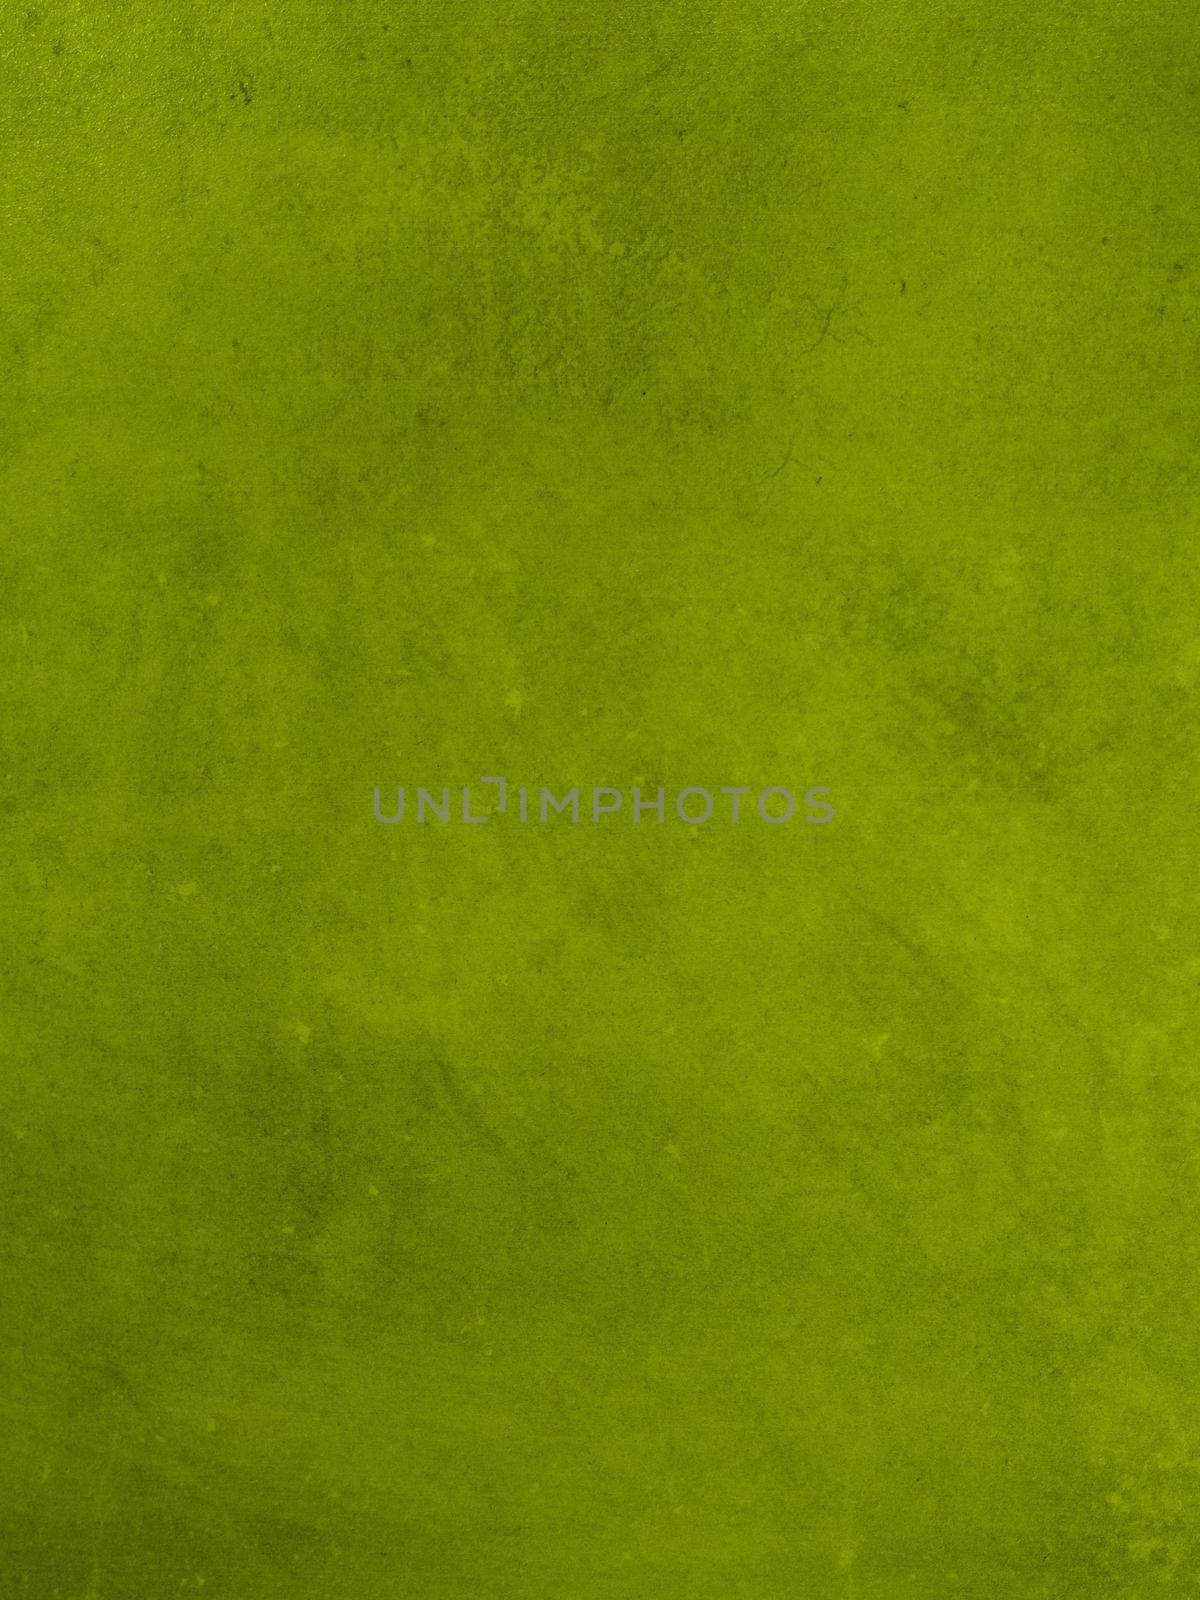 green billiard fabric texture background. High quality beautiful photo concept by Zahard